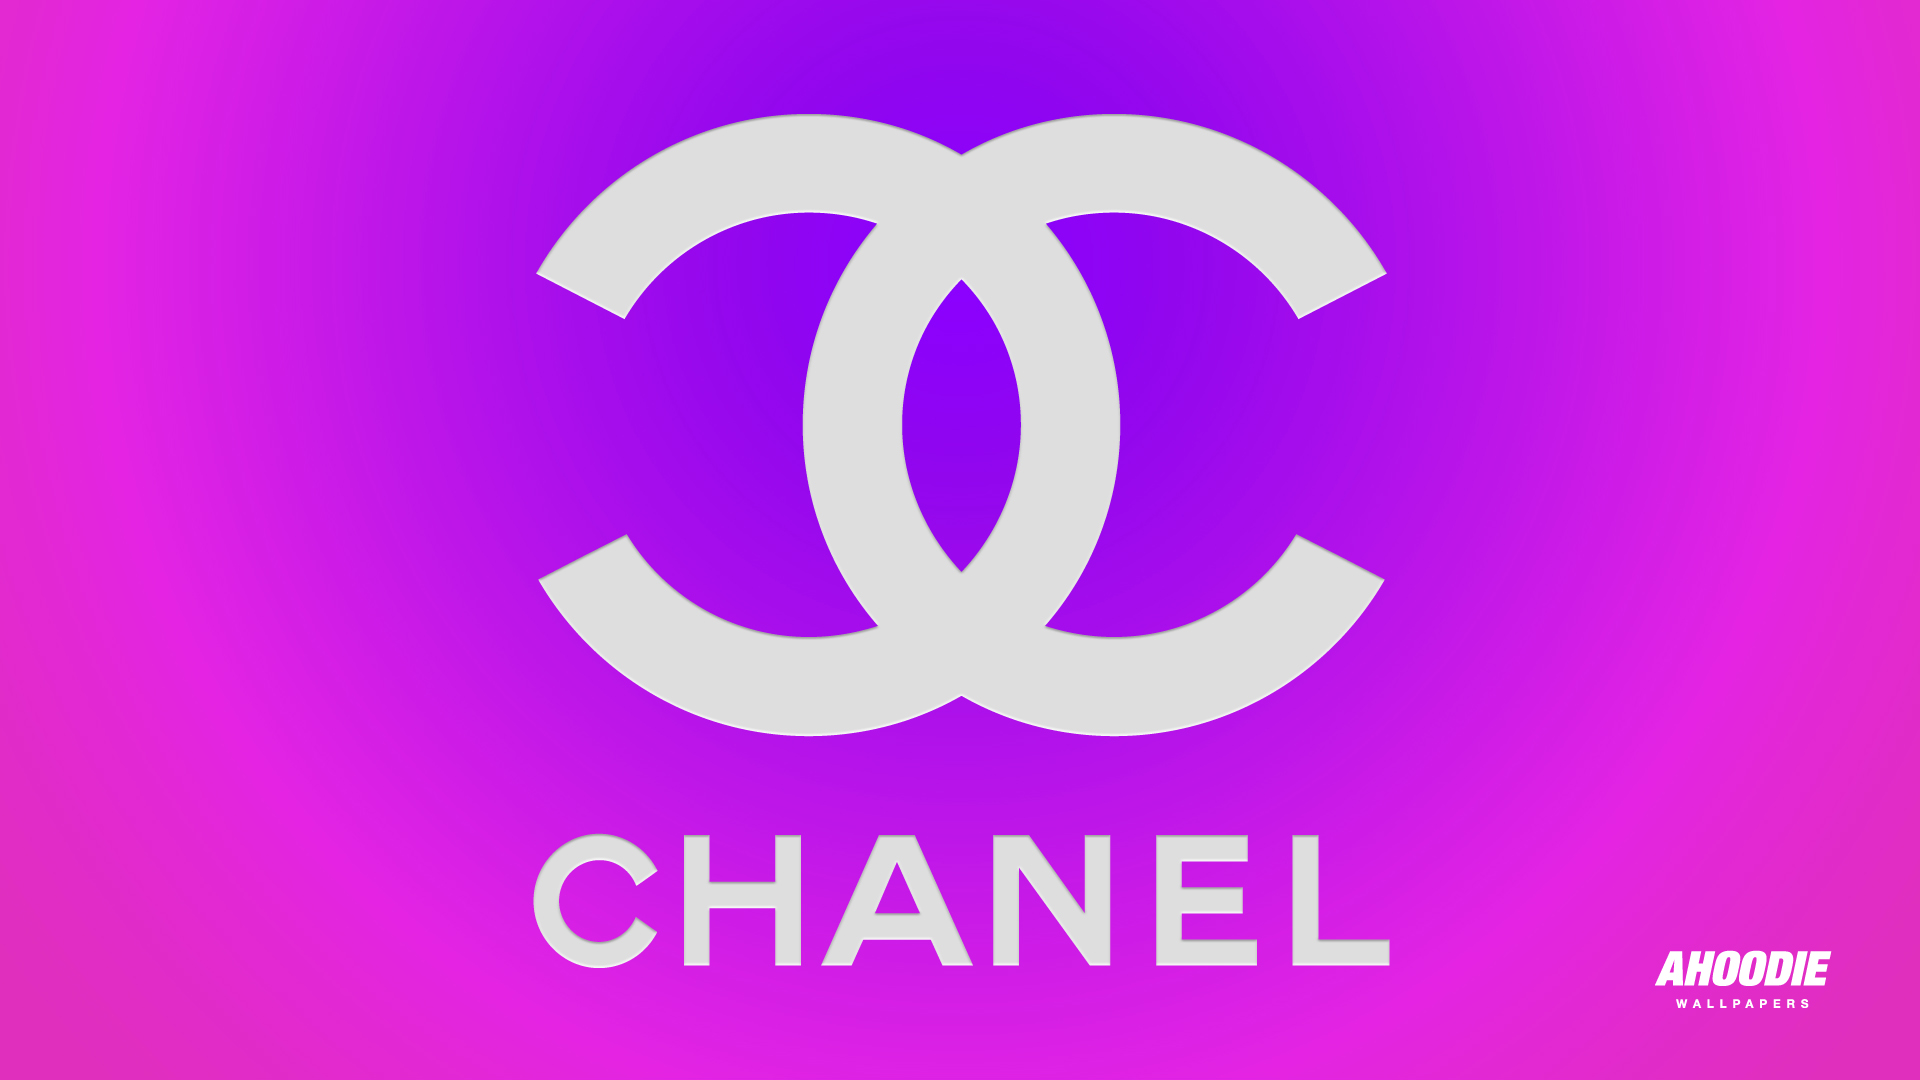 Chanel Wallpaper HD Desktop Pictures In High Definition